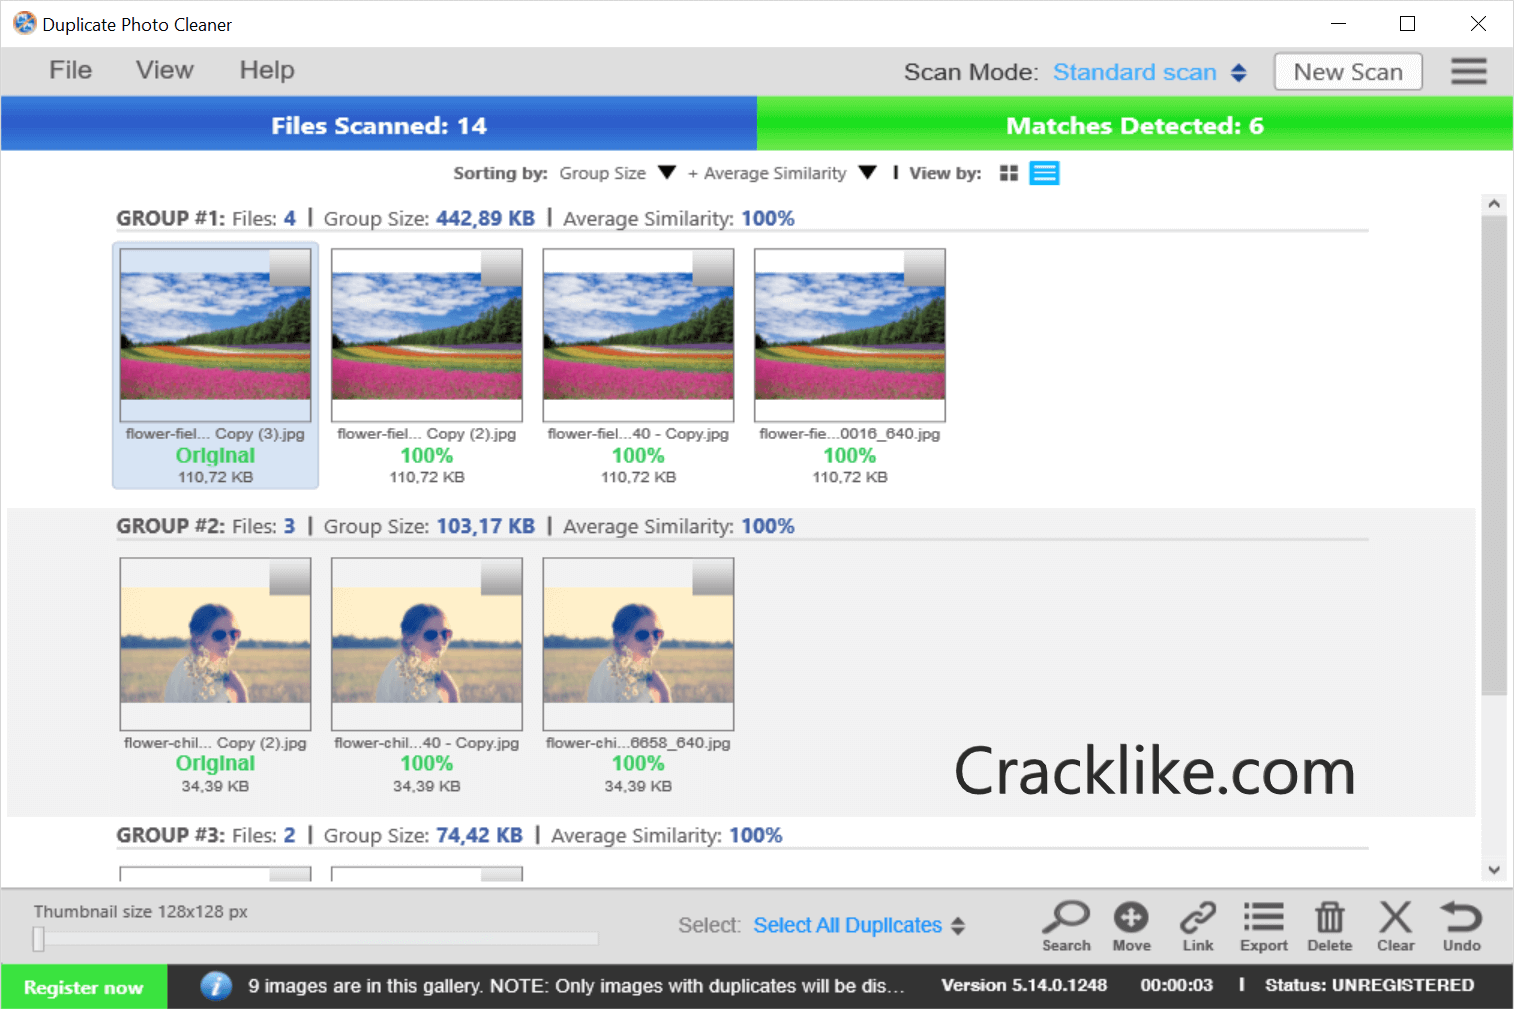 Duplicate Photo Cleaner 7.3.0.10 Crack With License Key Latest Version Free Download 2022